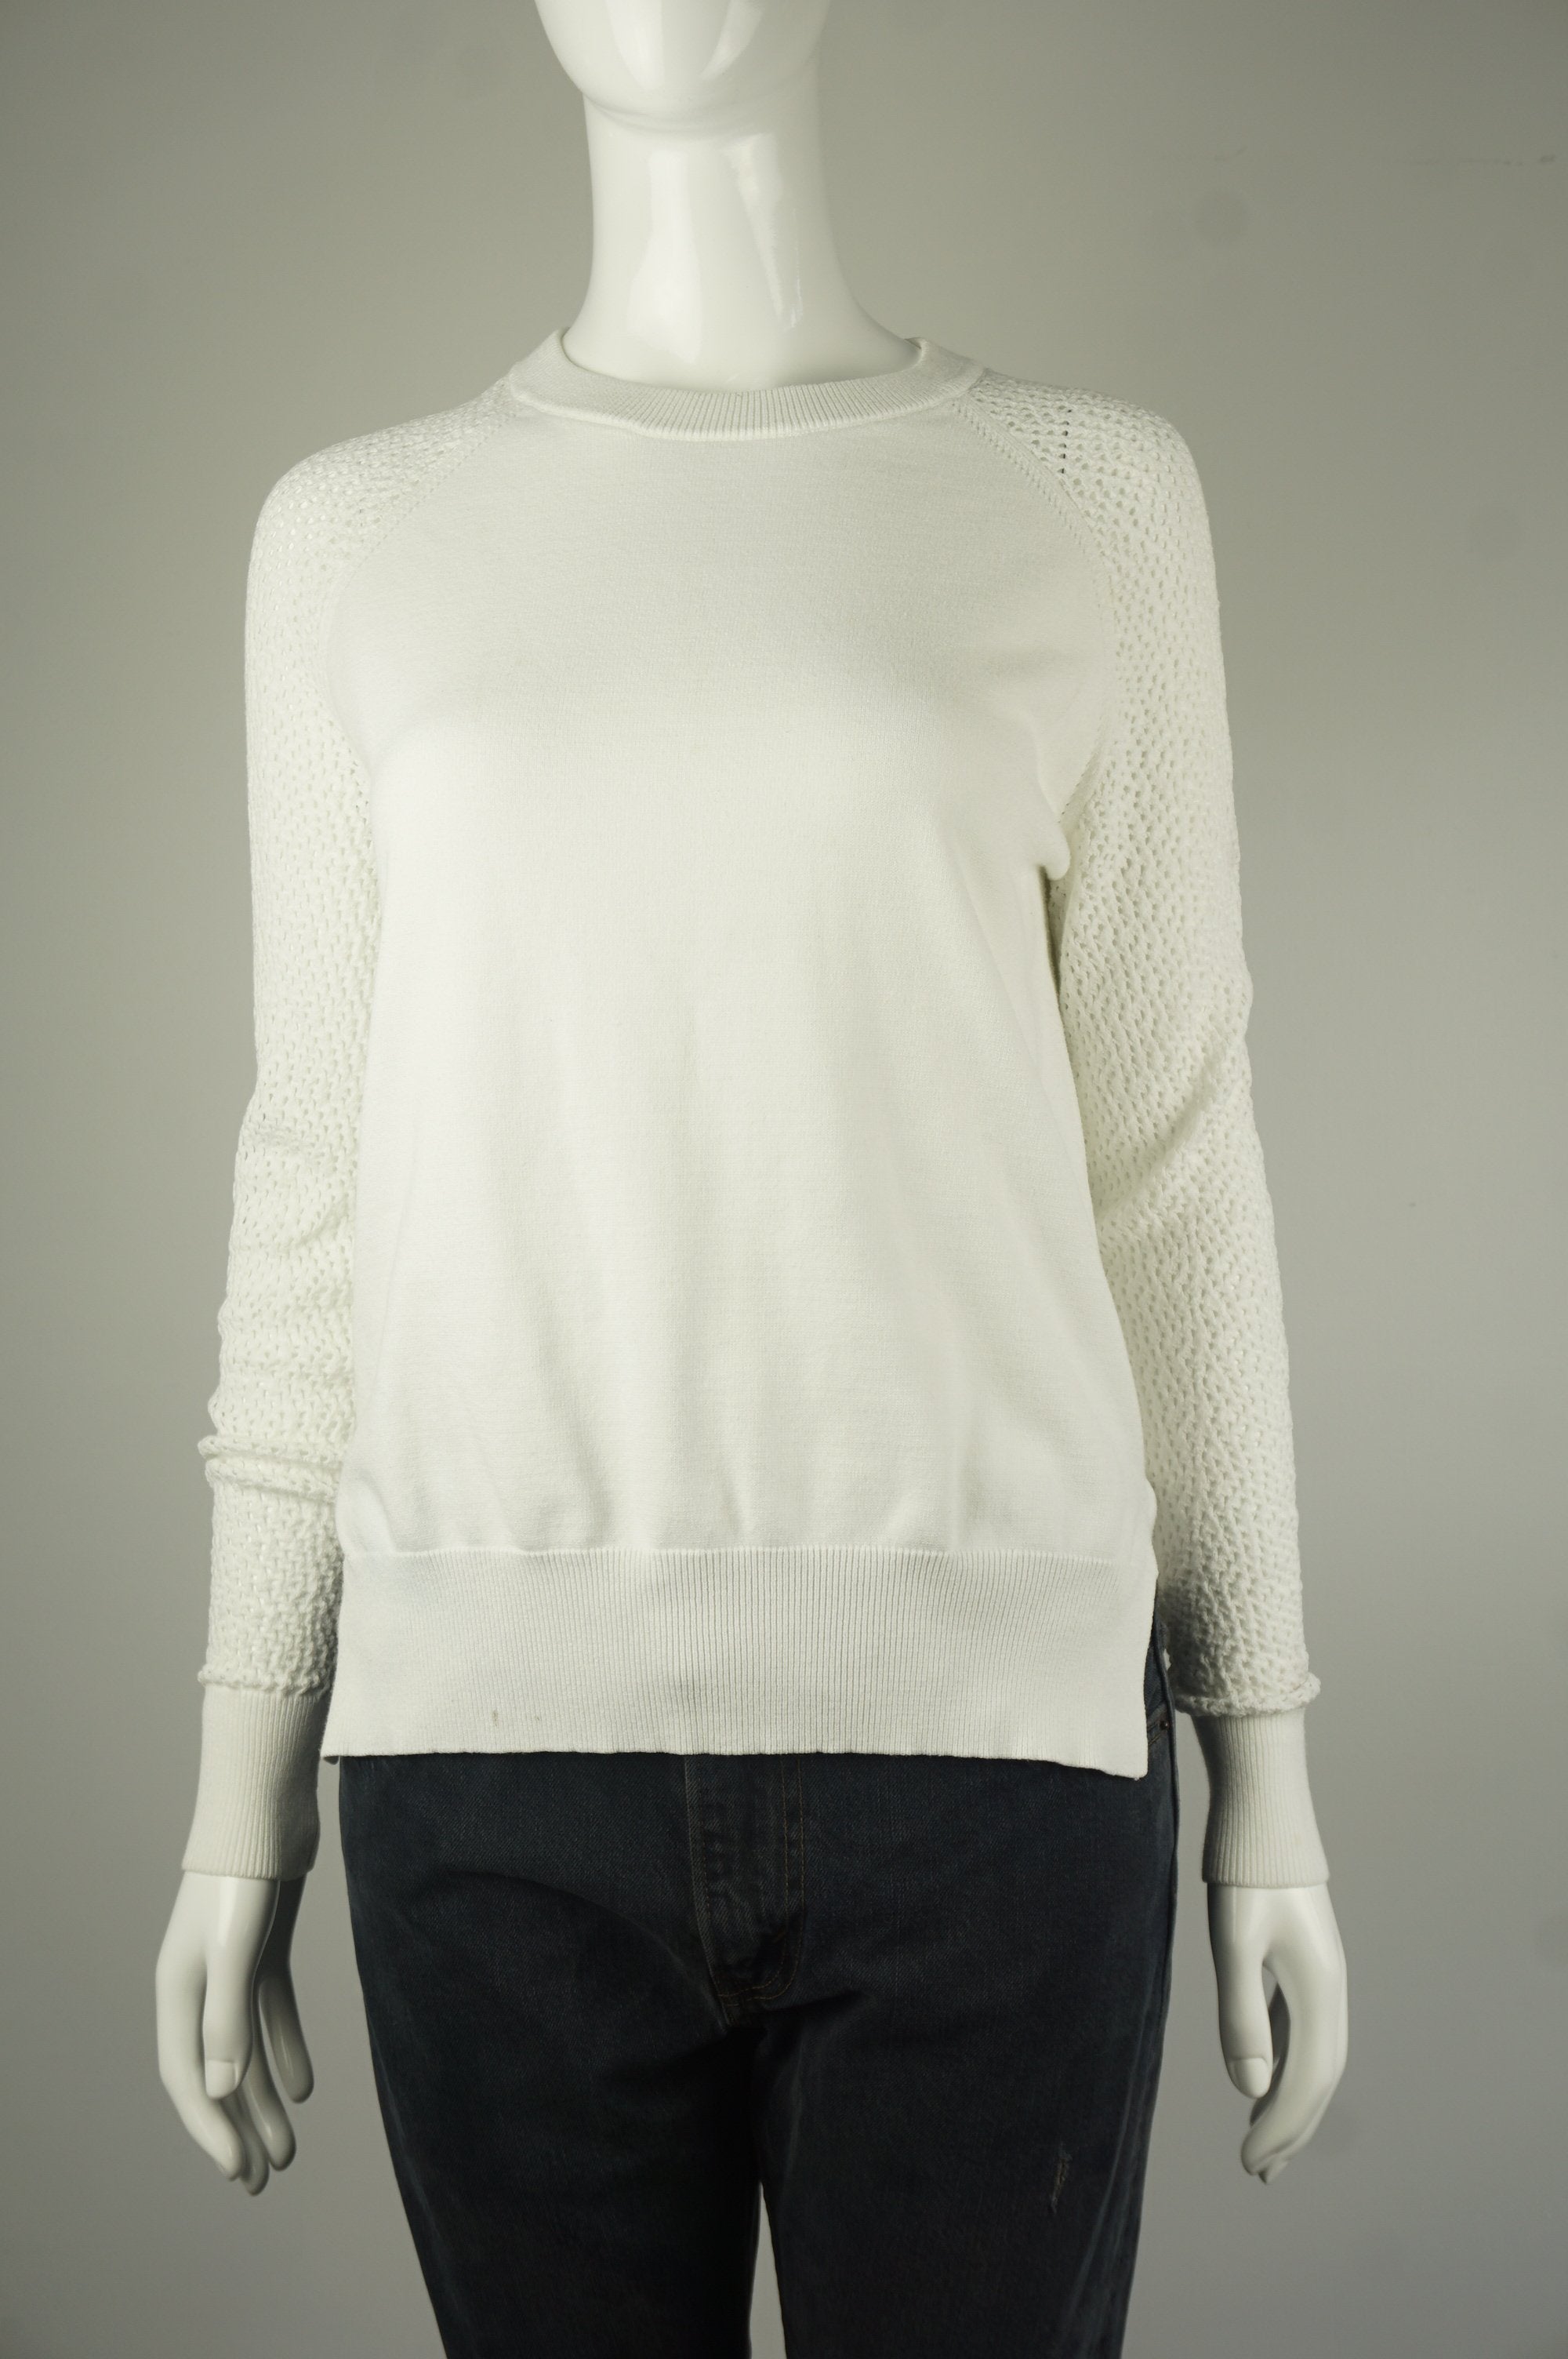 Wilfred White Sweater, Elegant yet casual sweater, White, Silk and cotton blend, women's Tops, women's White Tops, Wilfred women's Tops, women's white sweater, women's white sweater with lace sleeves